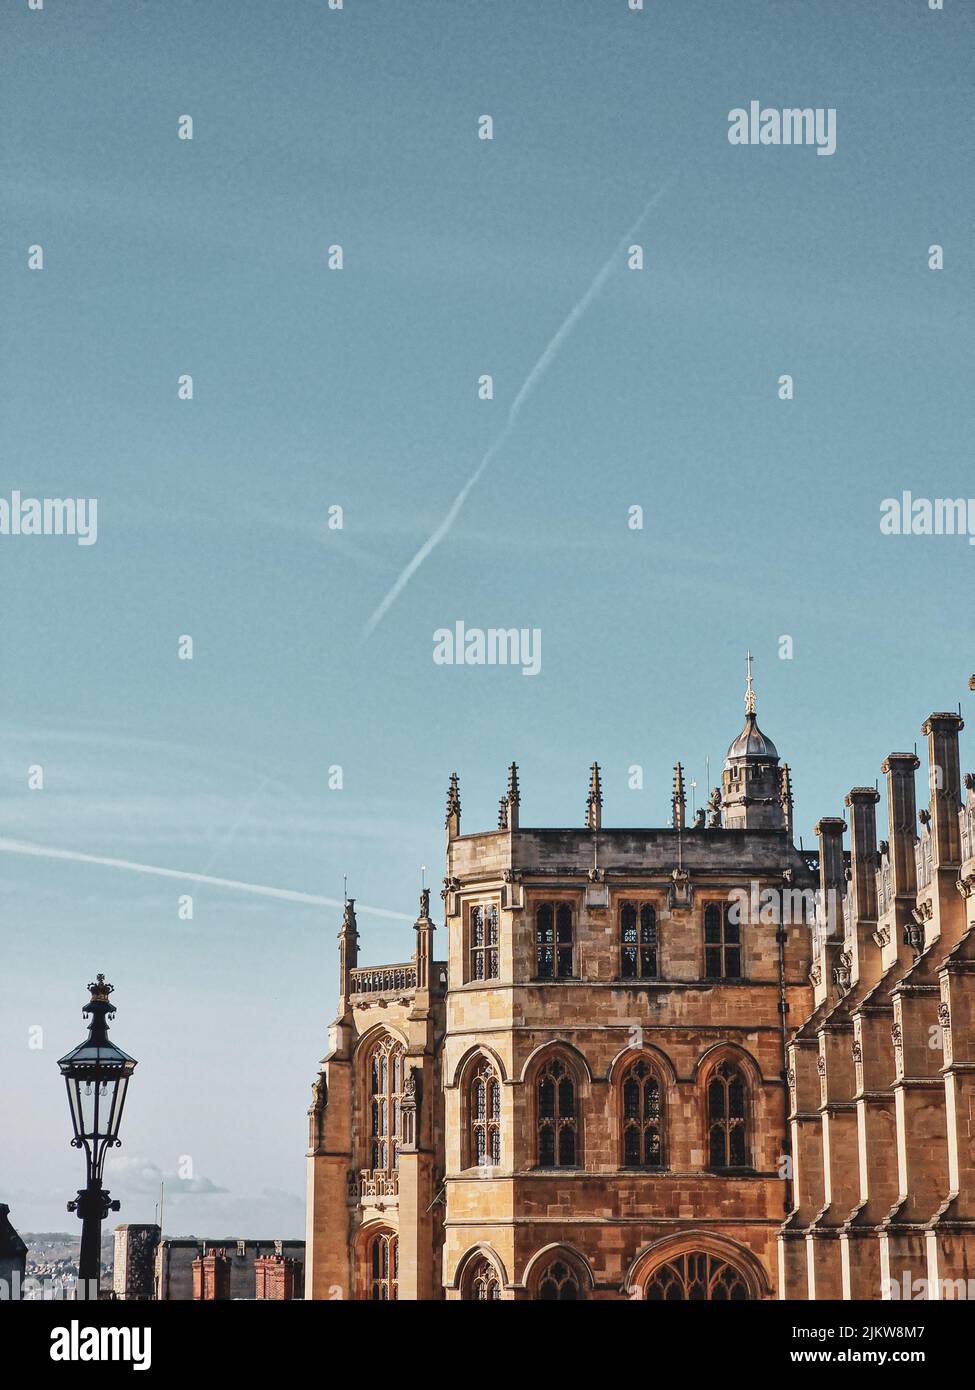 A vertical shot of British architecture on a sunny day, England, UK Stock Photo